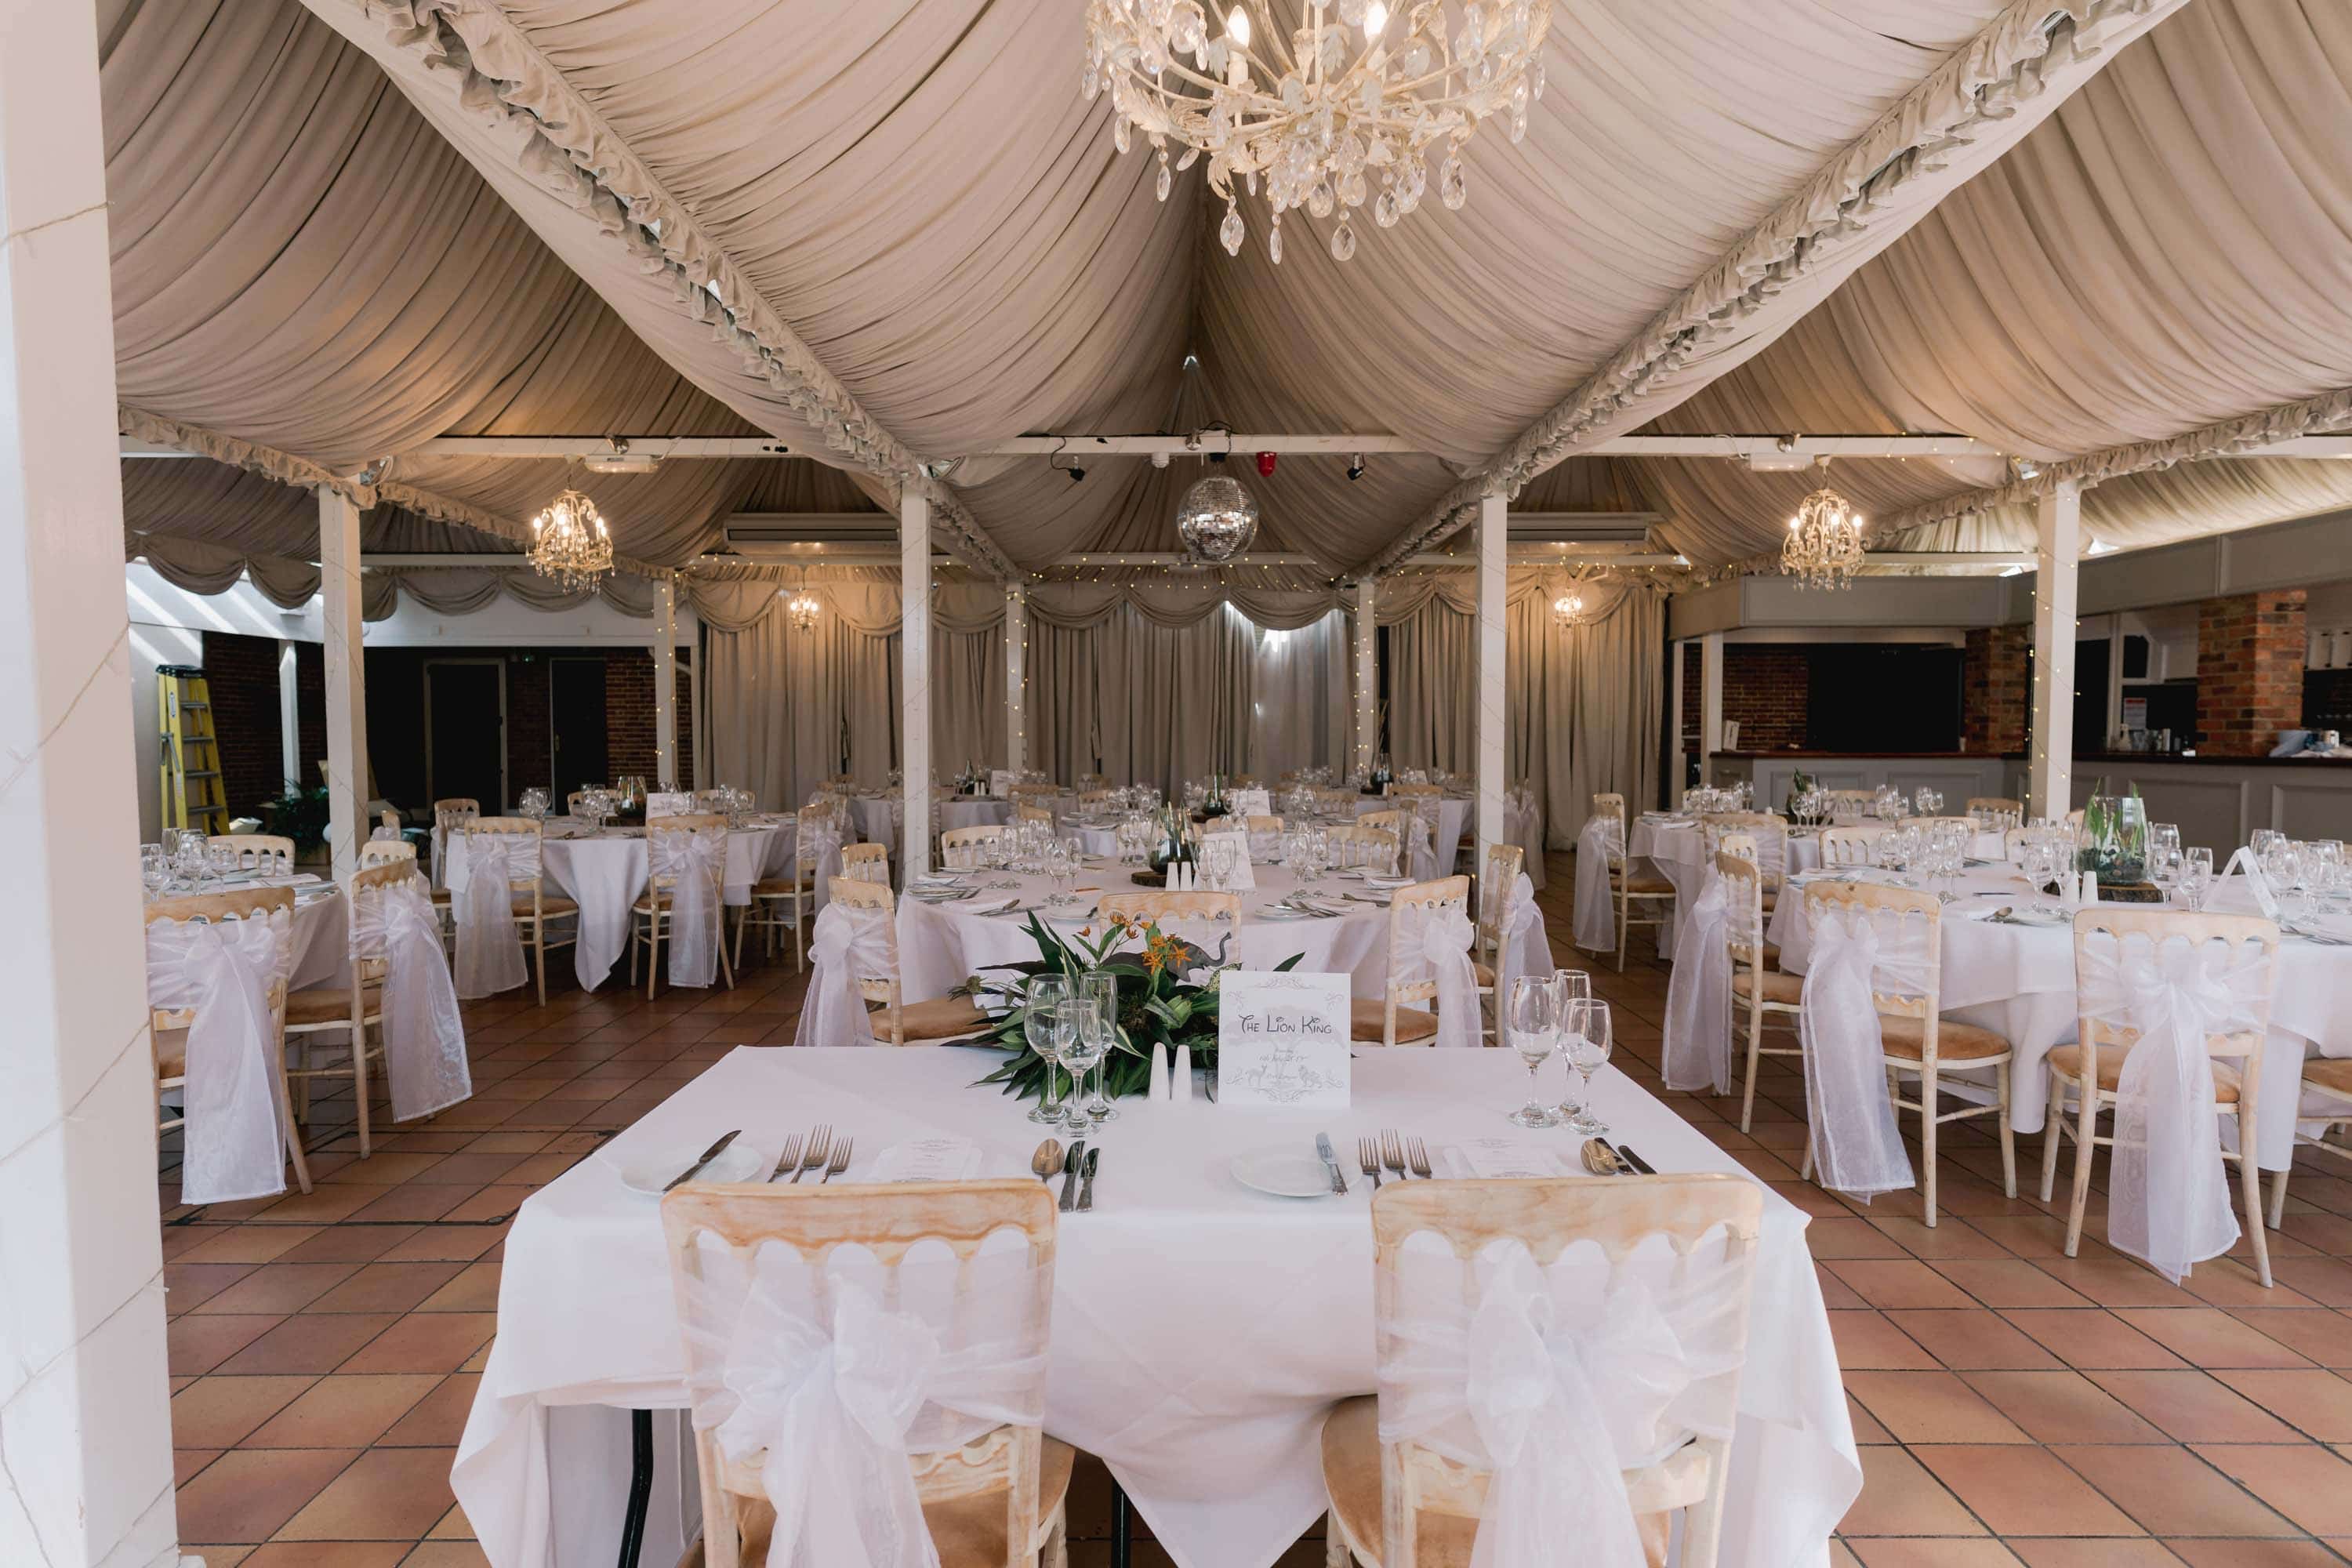 The wedding marquee at Port Lympne Safari Park in Kent.